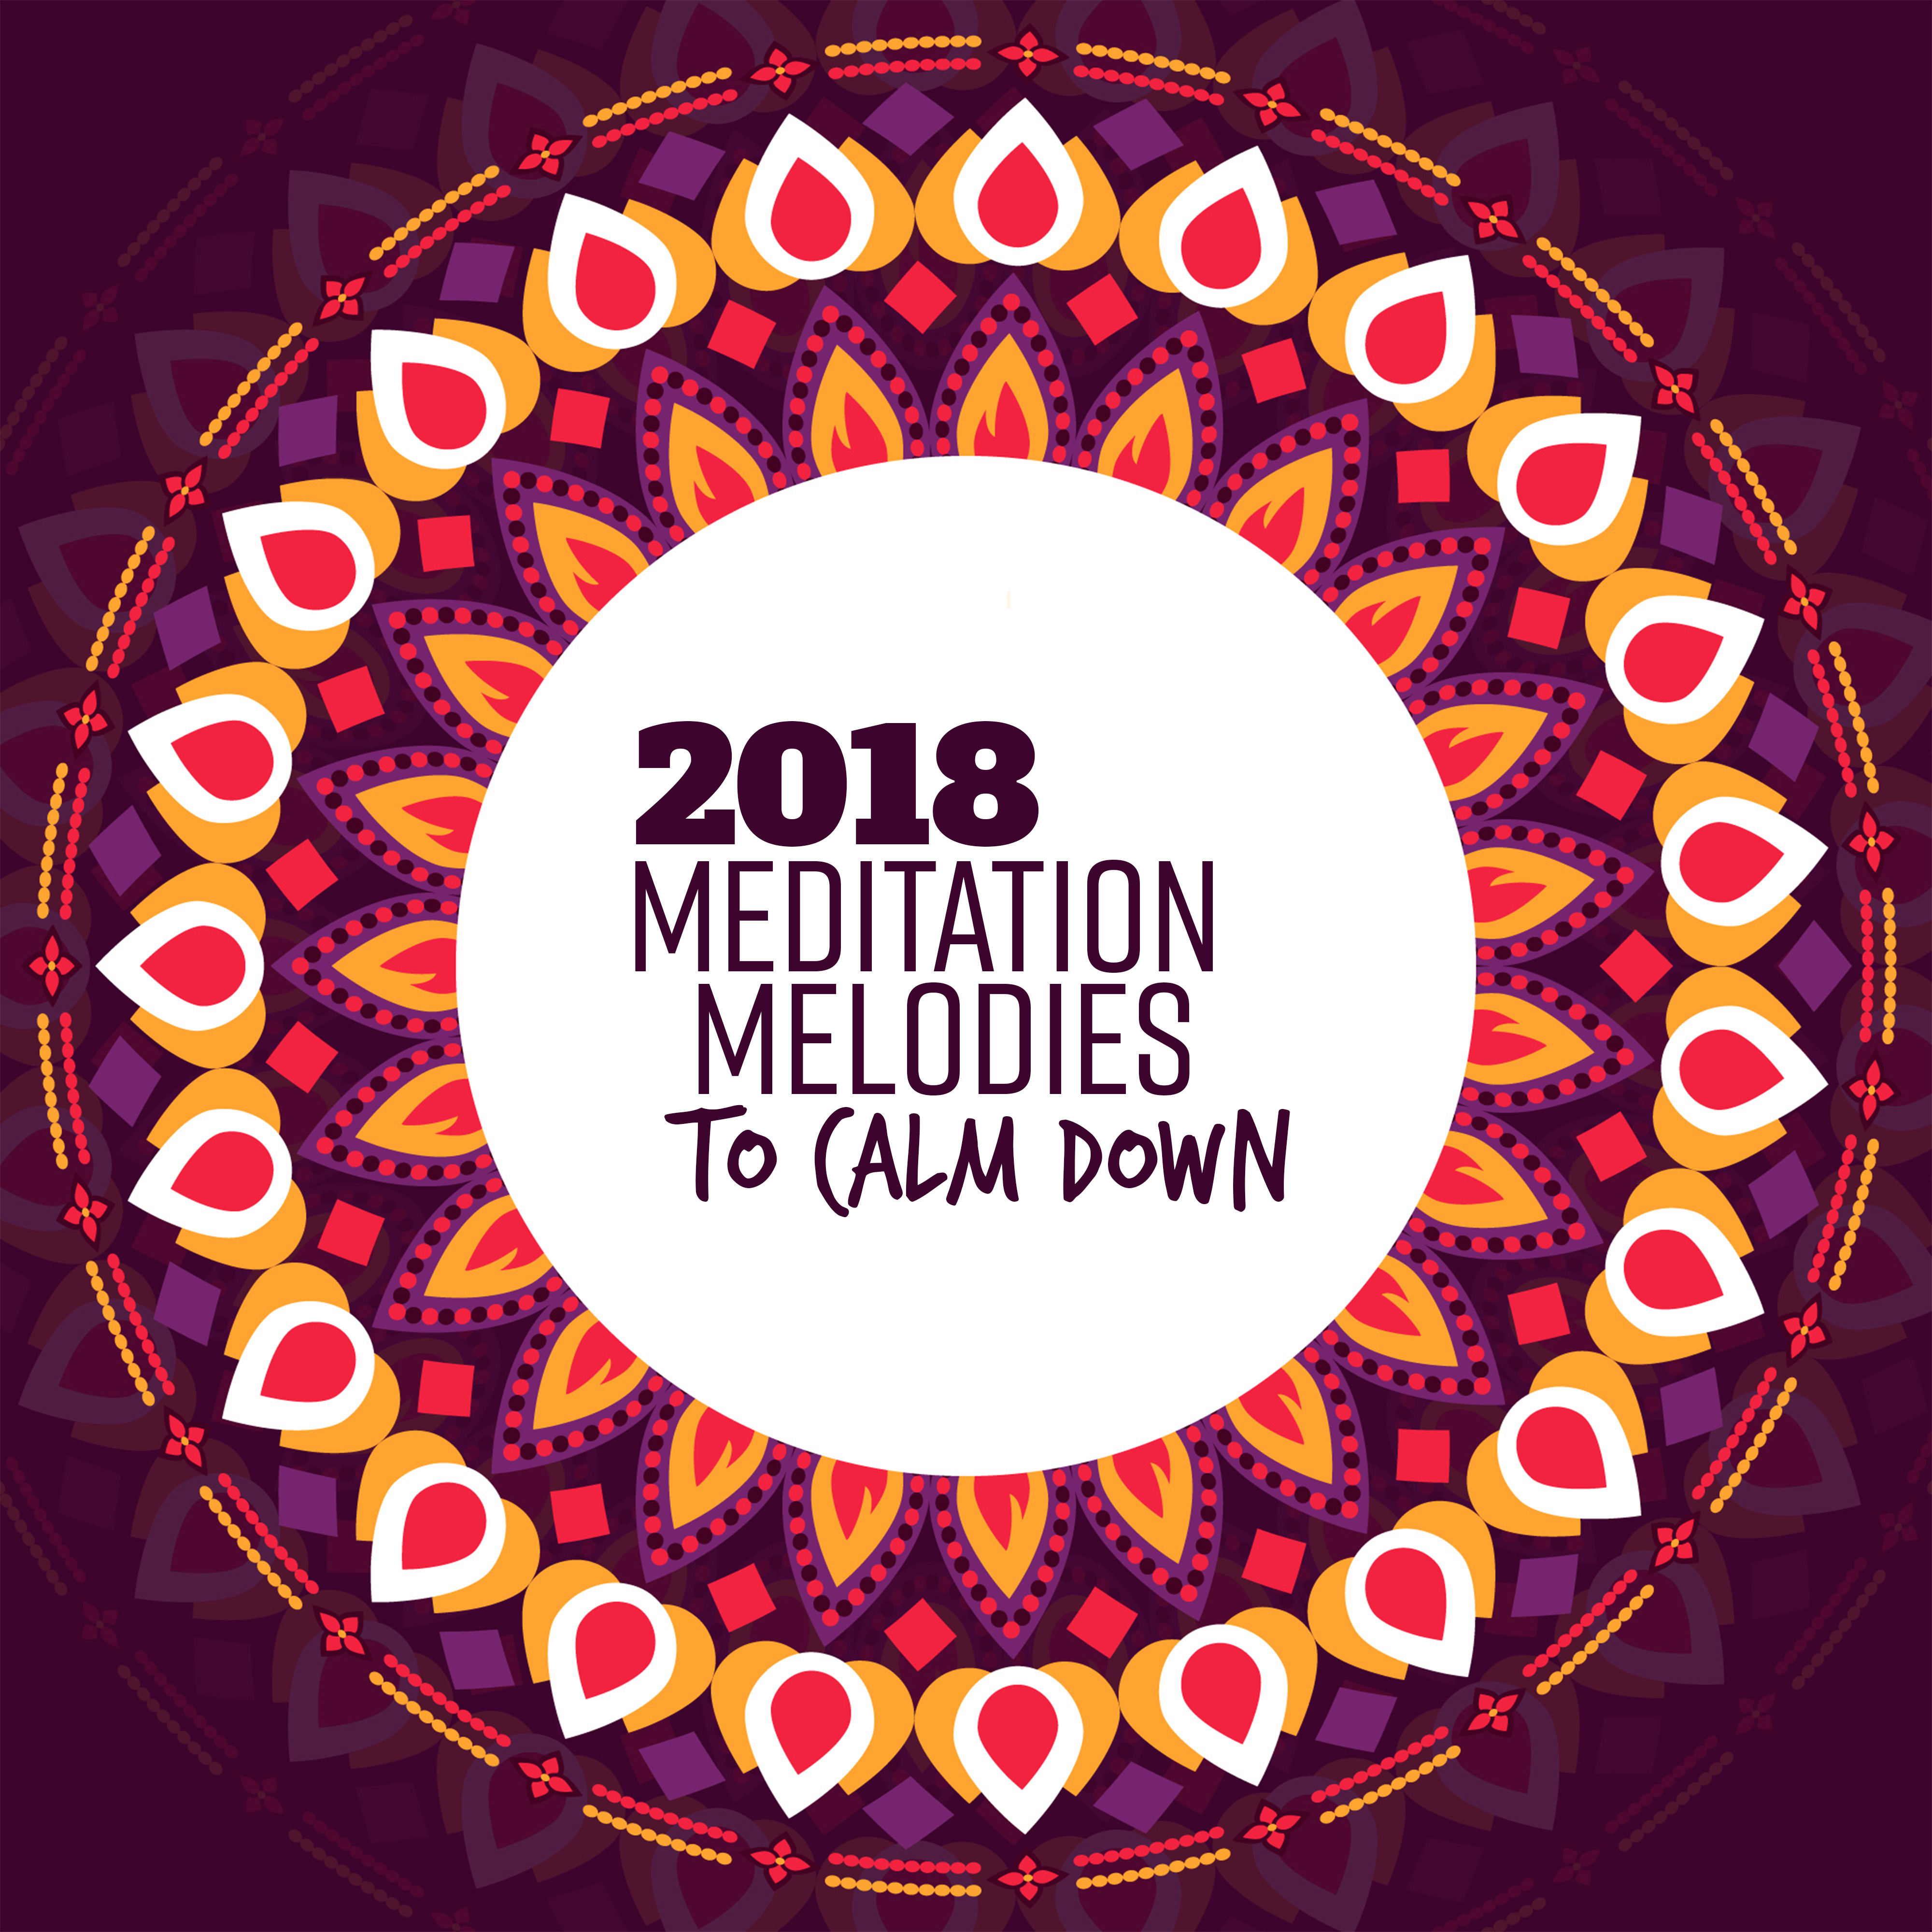 2018 Meditation Melodies to Calm Down